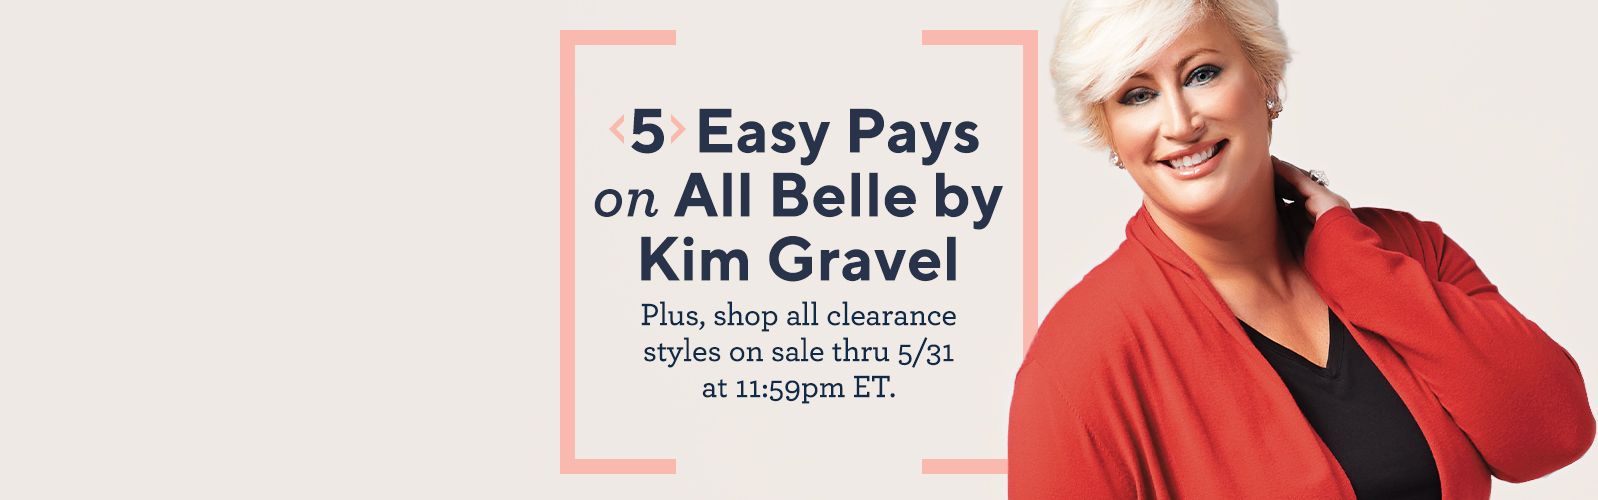 5 Easy Pays on All Belle by Kim Gravel Plus, shop all clearance styles on sale thru 5/31 at 11:59pm ET.